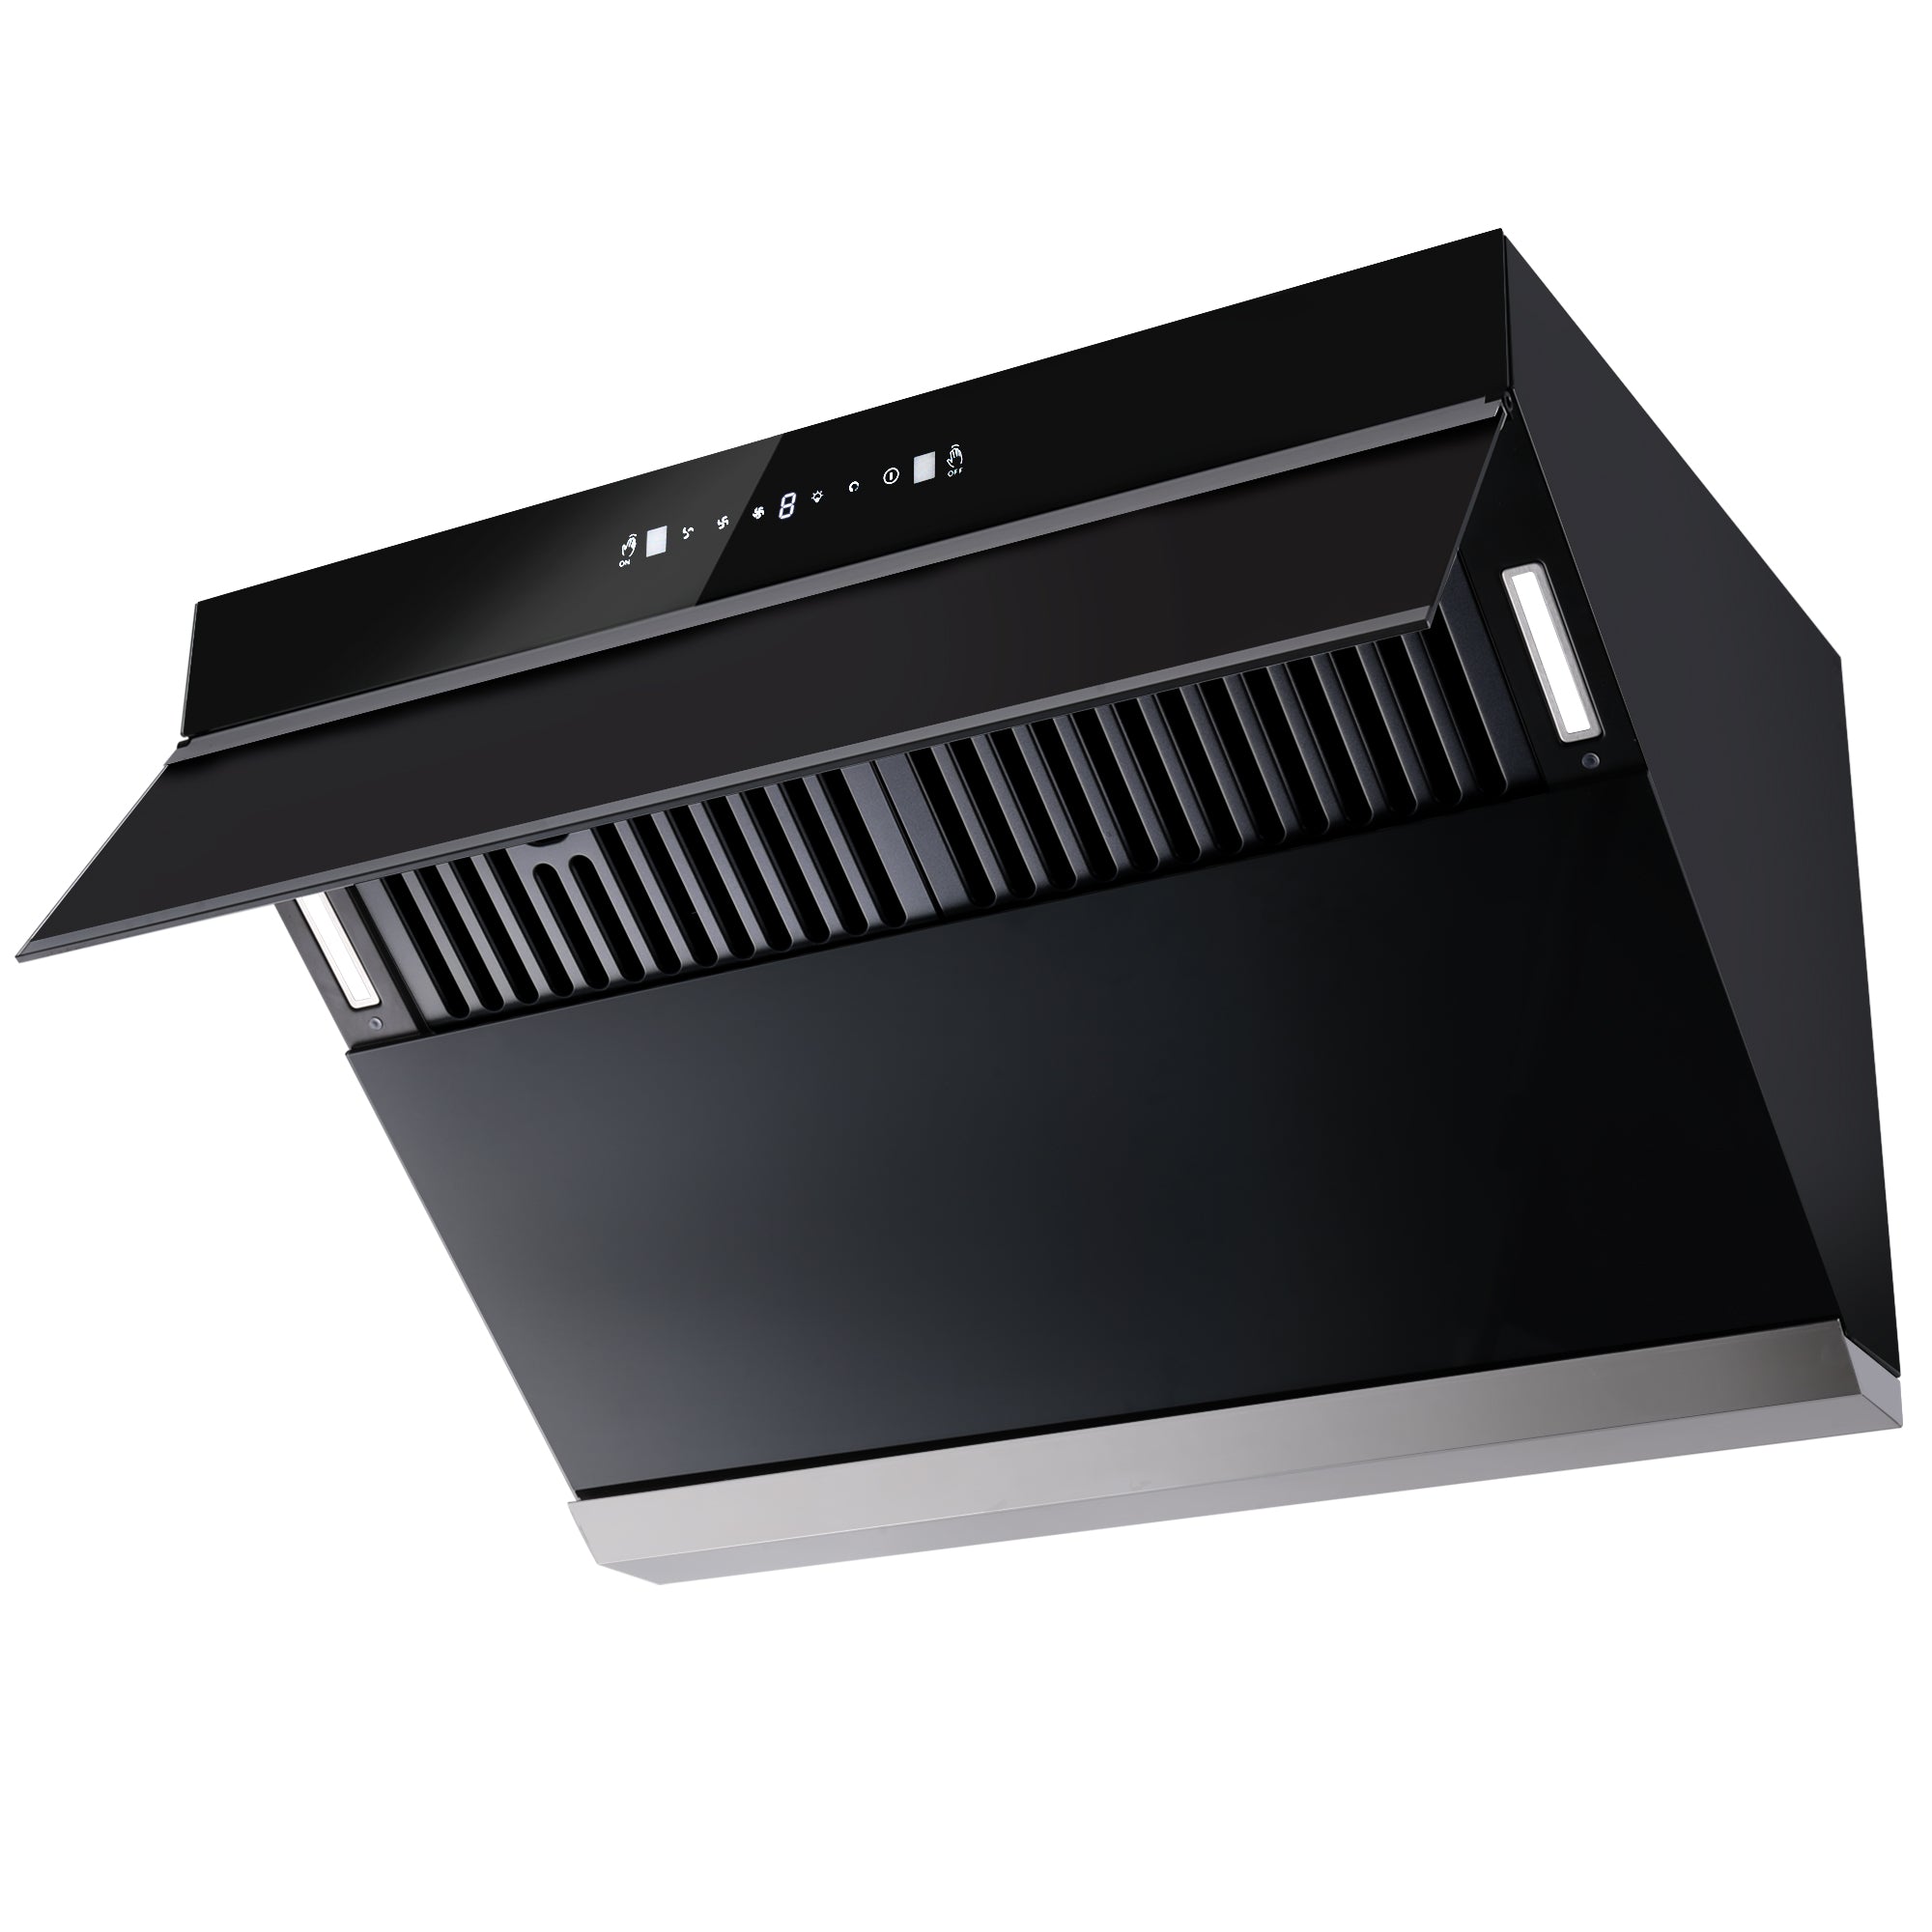 Tieasy 30 inch 900 CFM Wall Mount Or Under Cabinet Range Hood with Heating Auto-cleaning Function - ‎USCX08T75